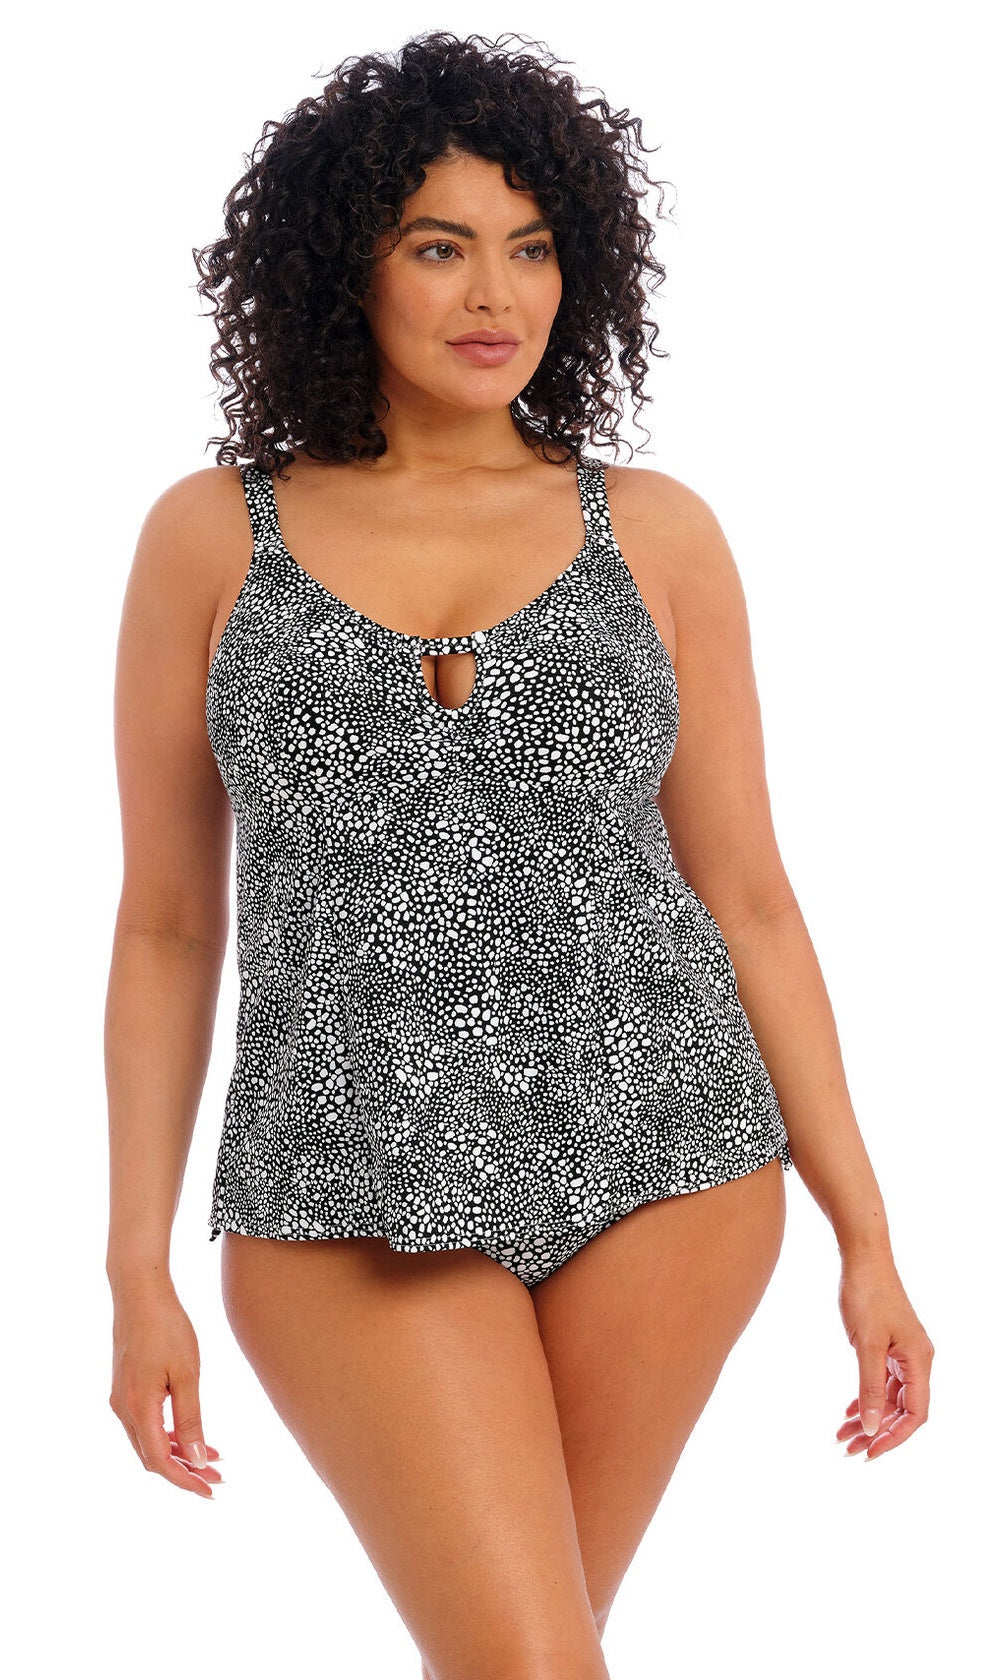 Pebble Cove Black Non Wired Moulded Tankini Top, Special Order XL - 6 XL